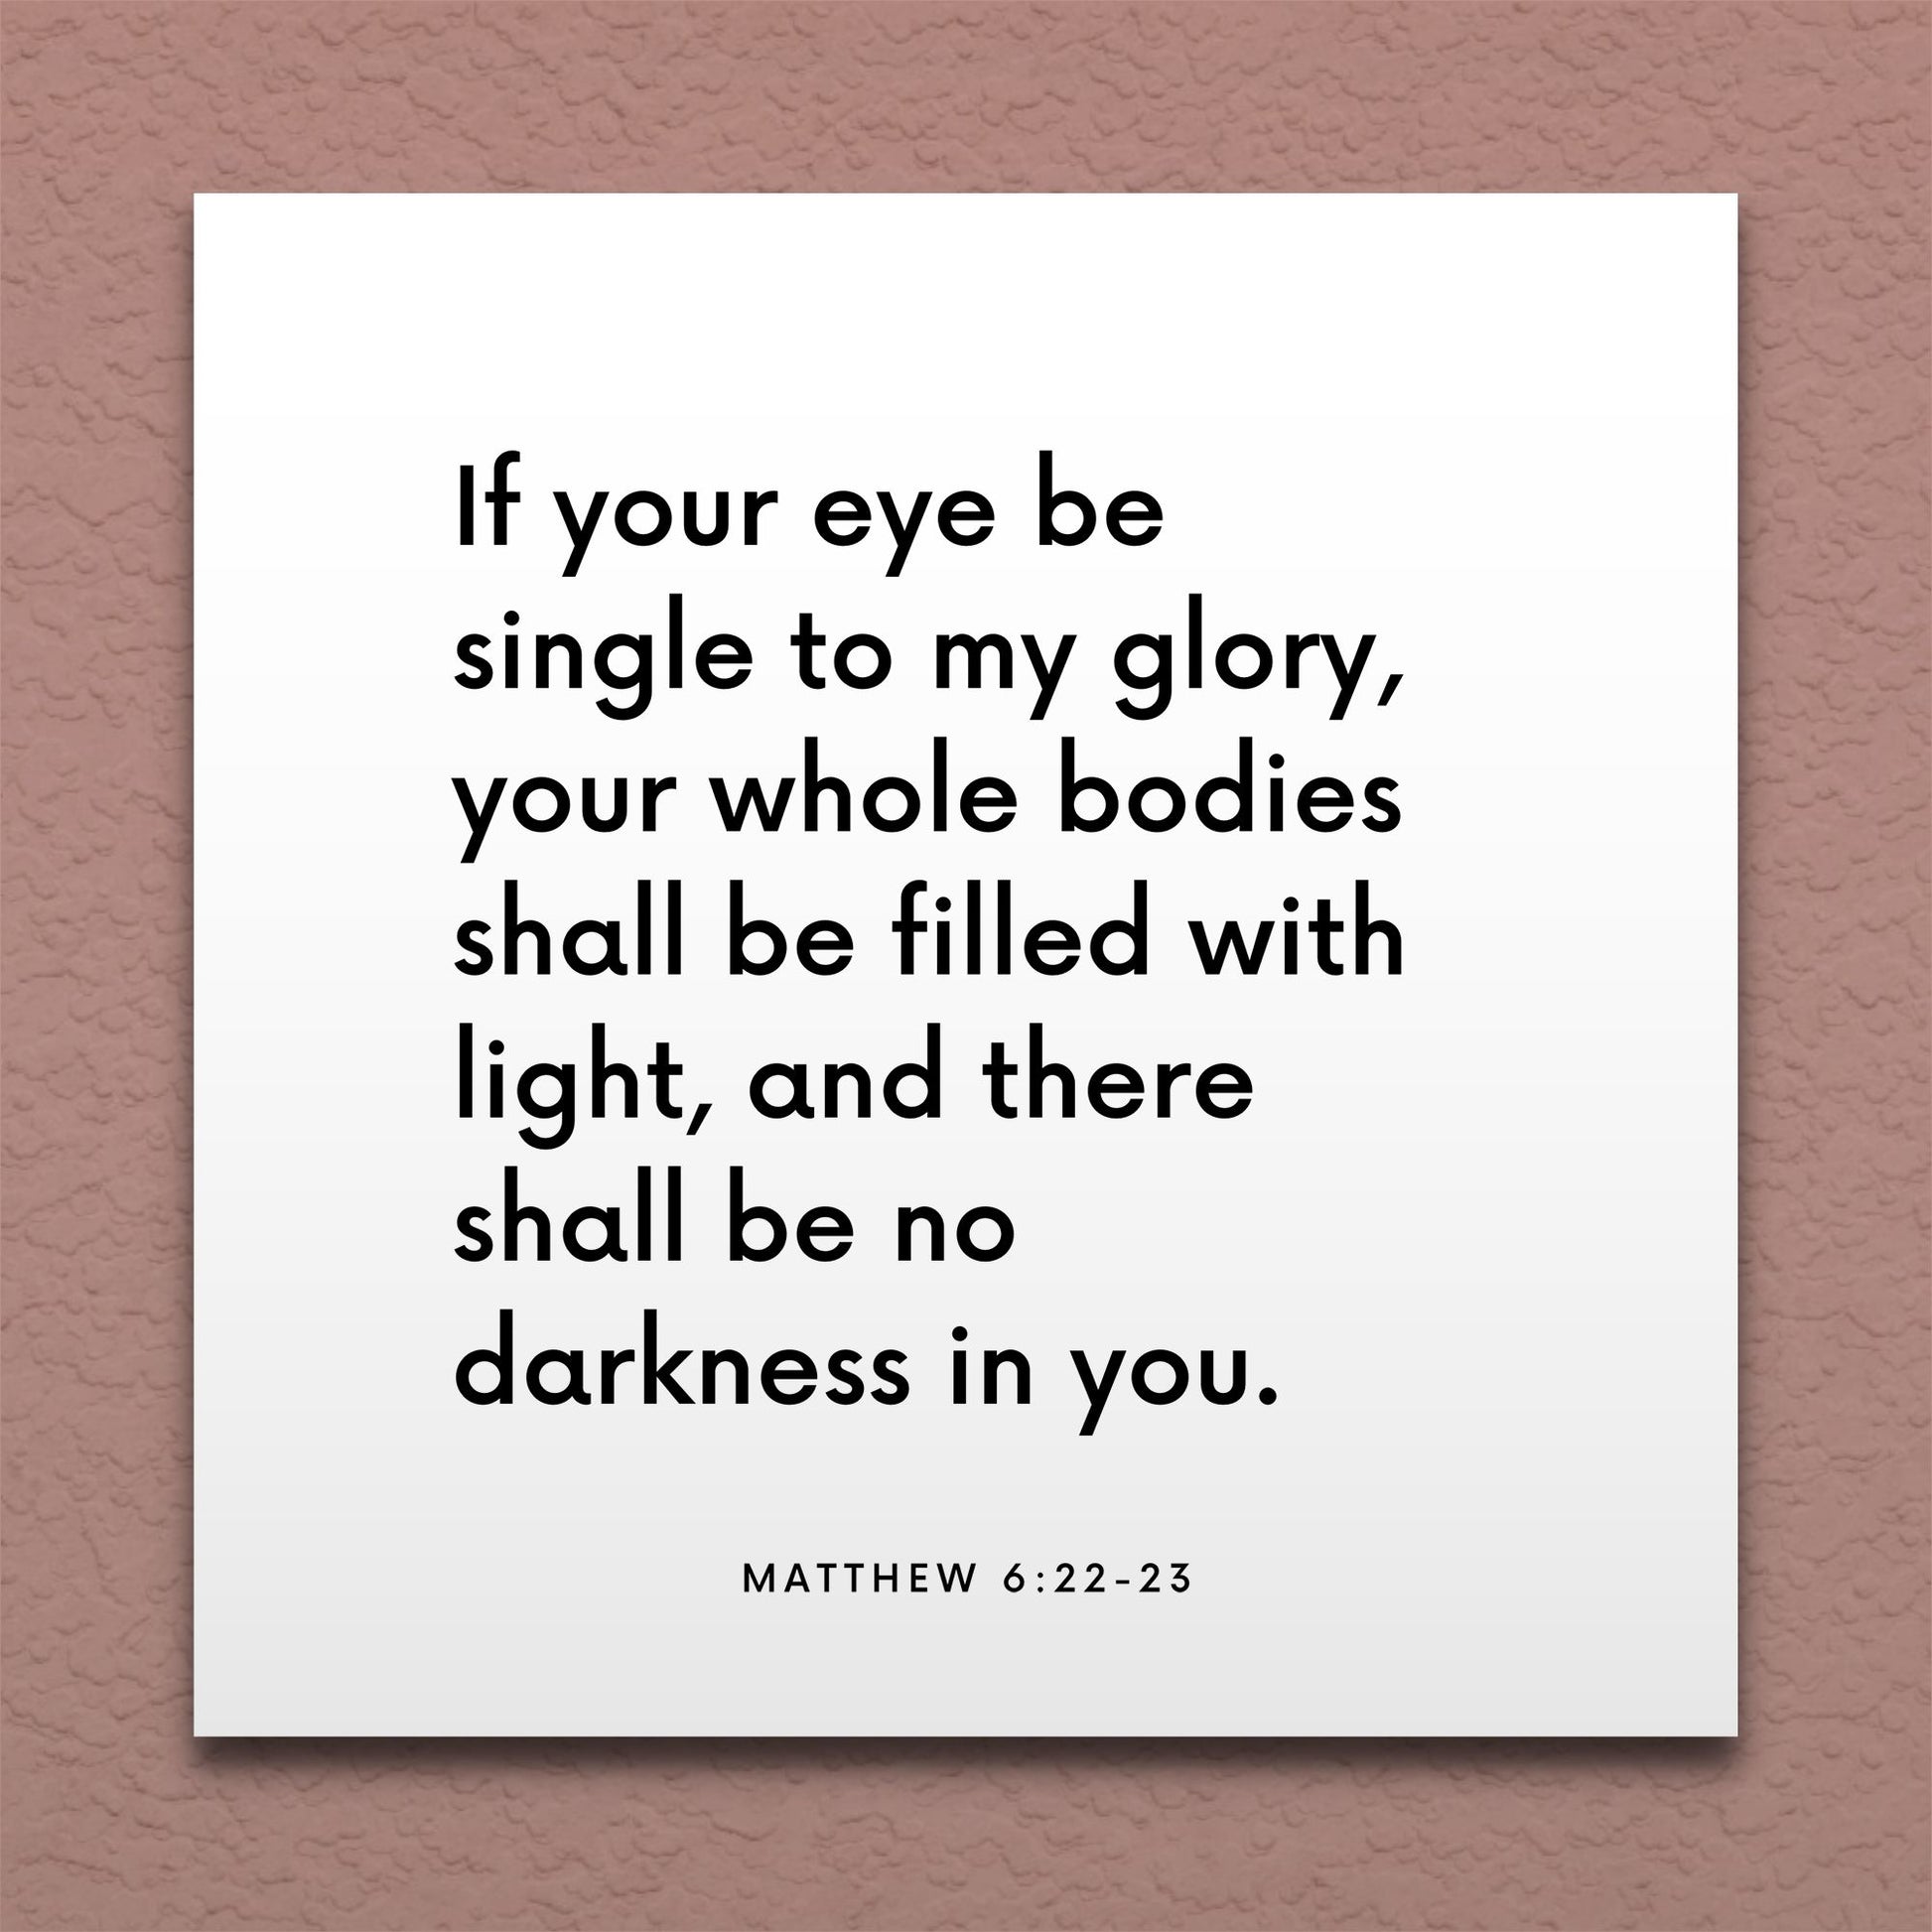 Wall-mounted scripture tile for Matthew 6:22-23 - "If your eye be single to my glory"